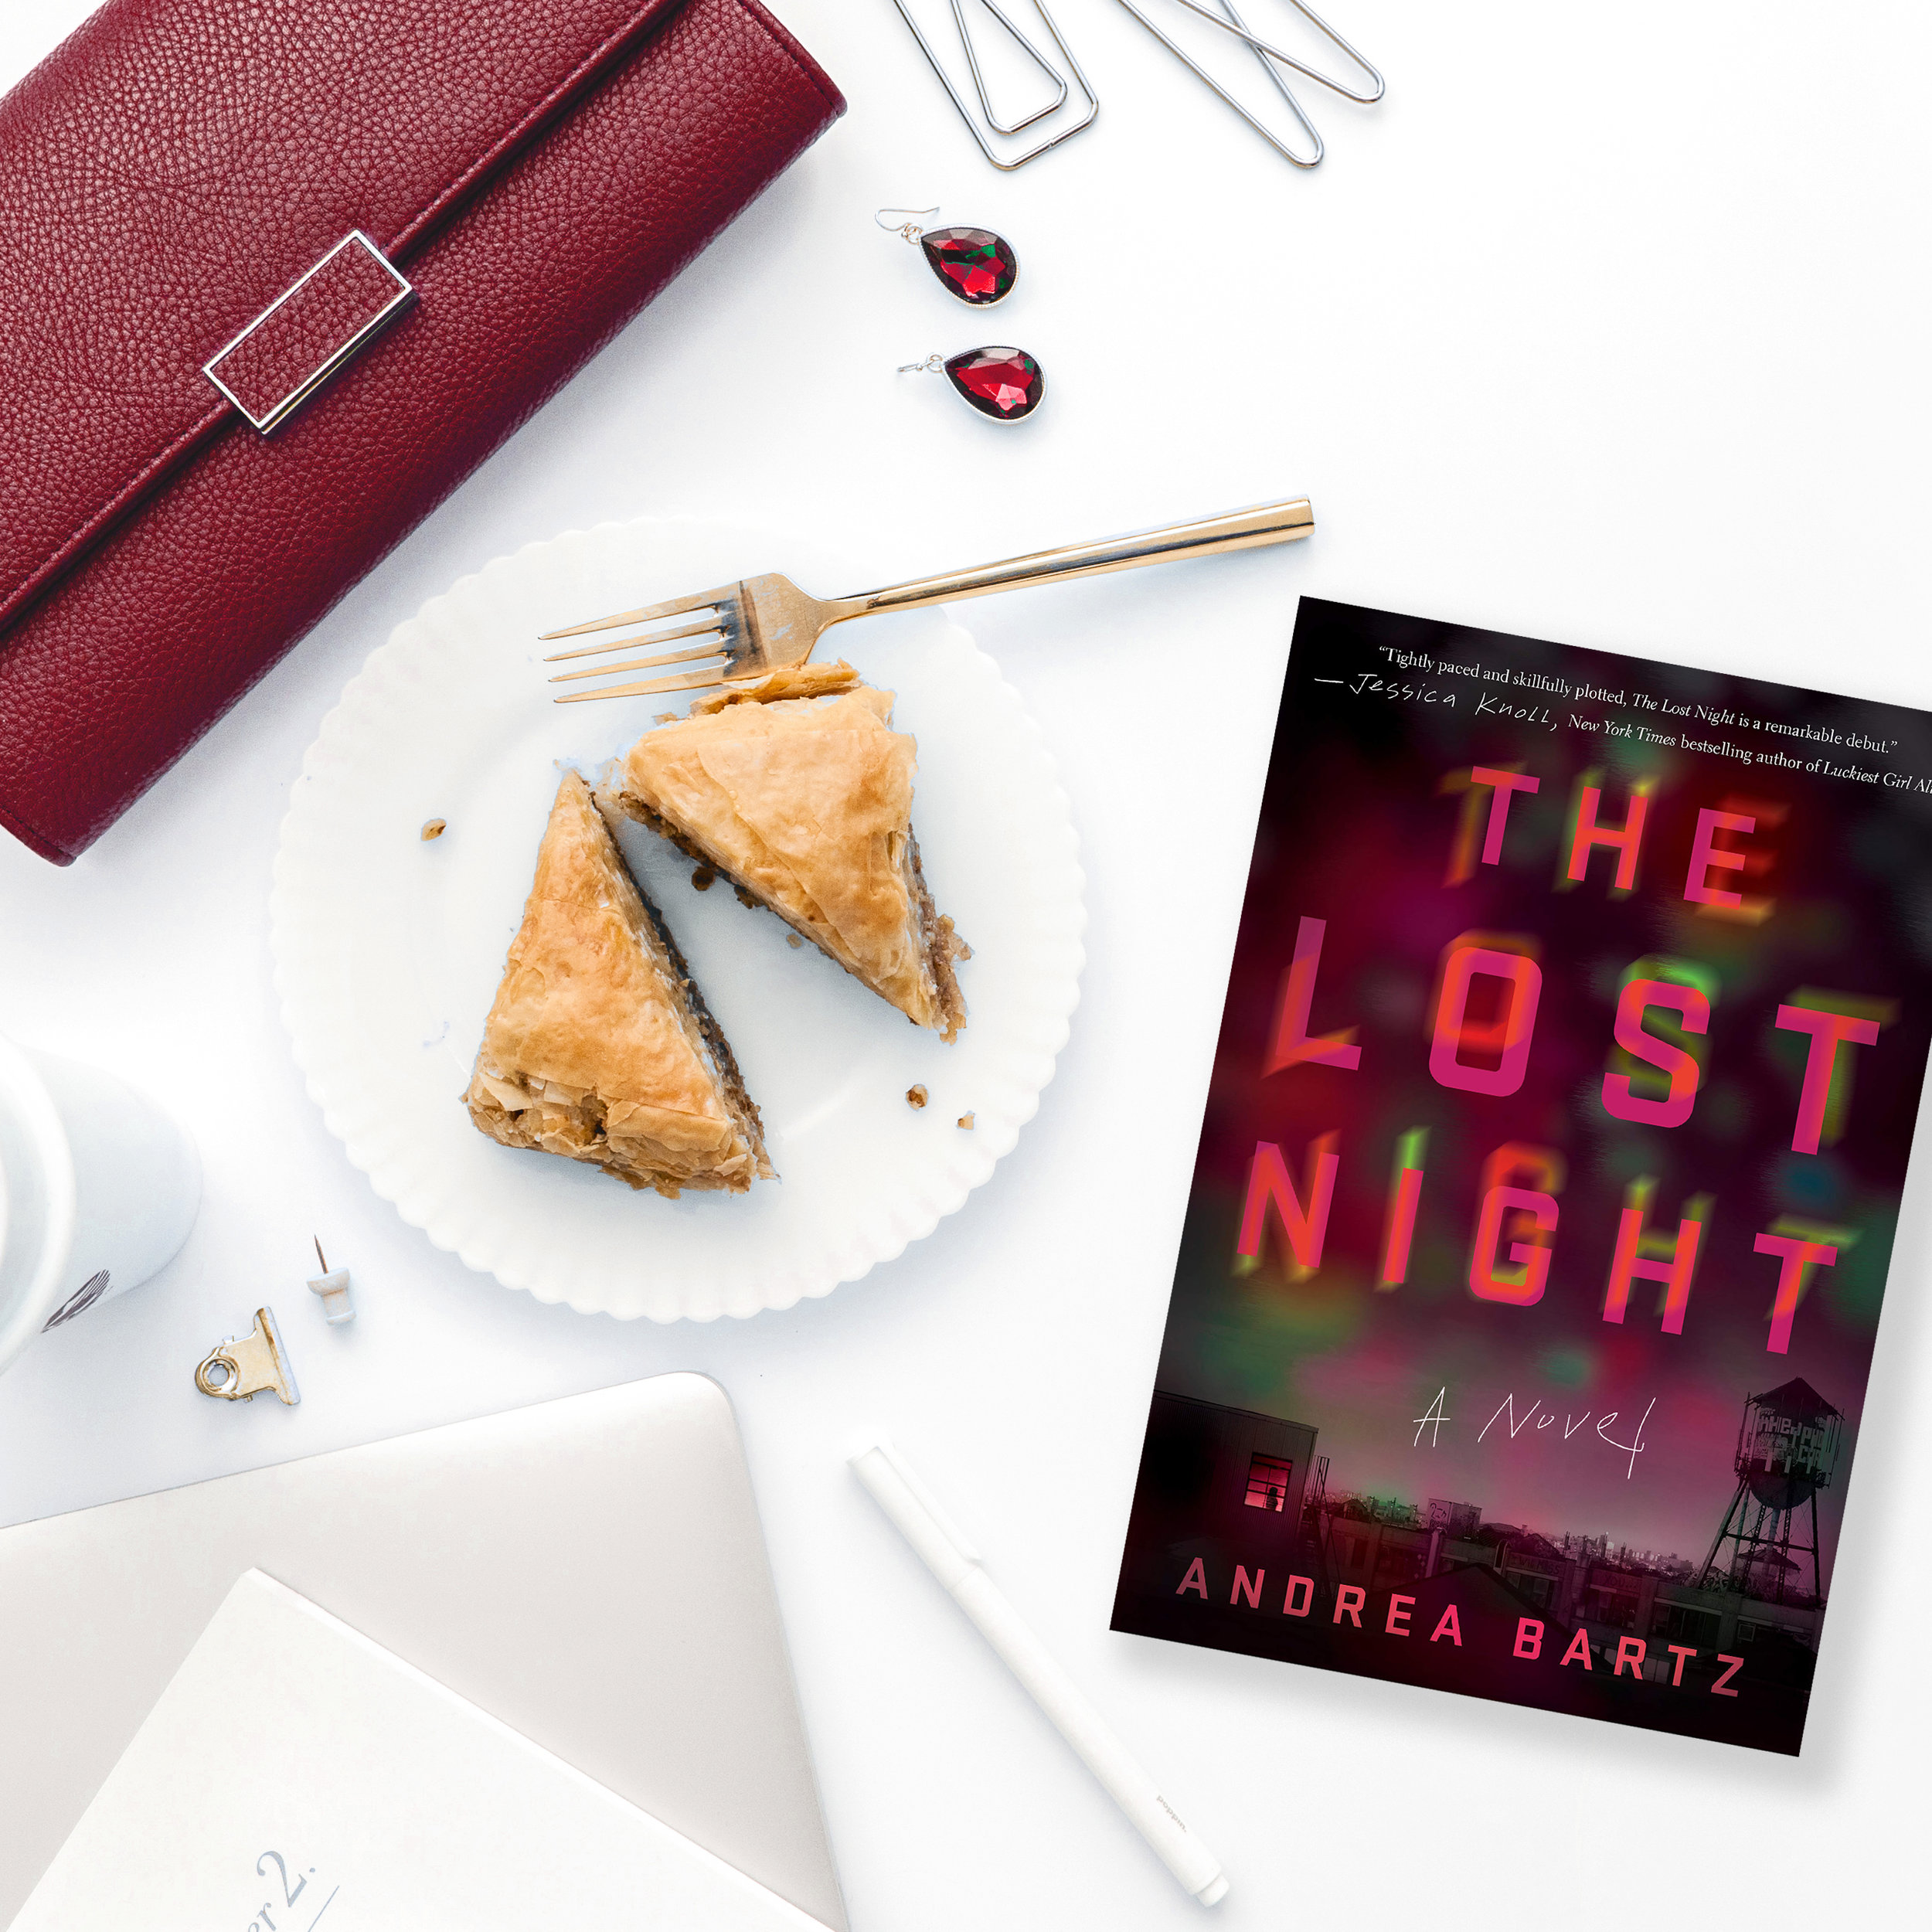 Download The lost night book Free